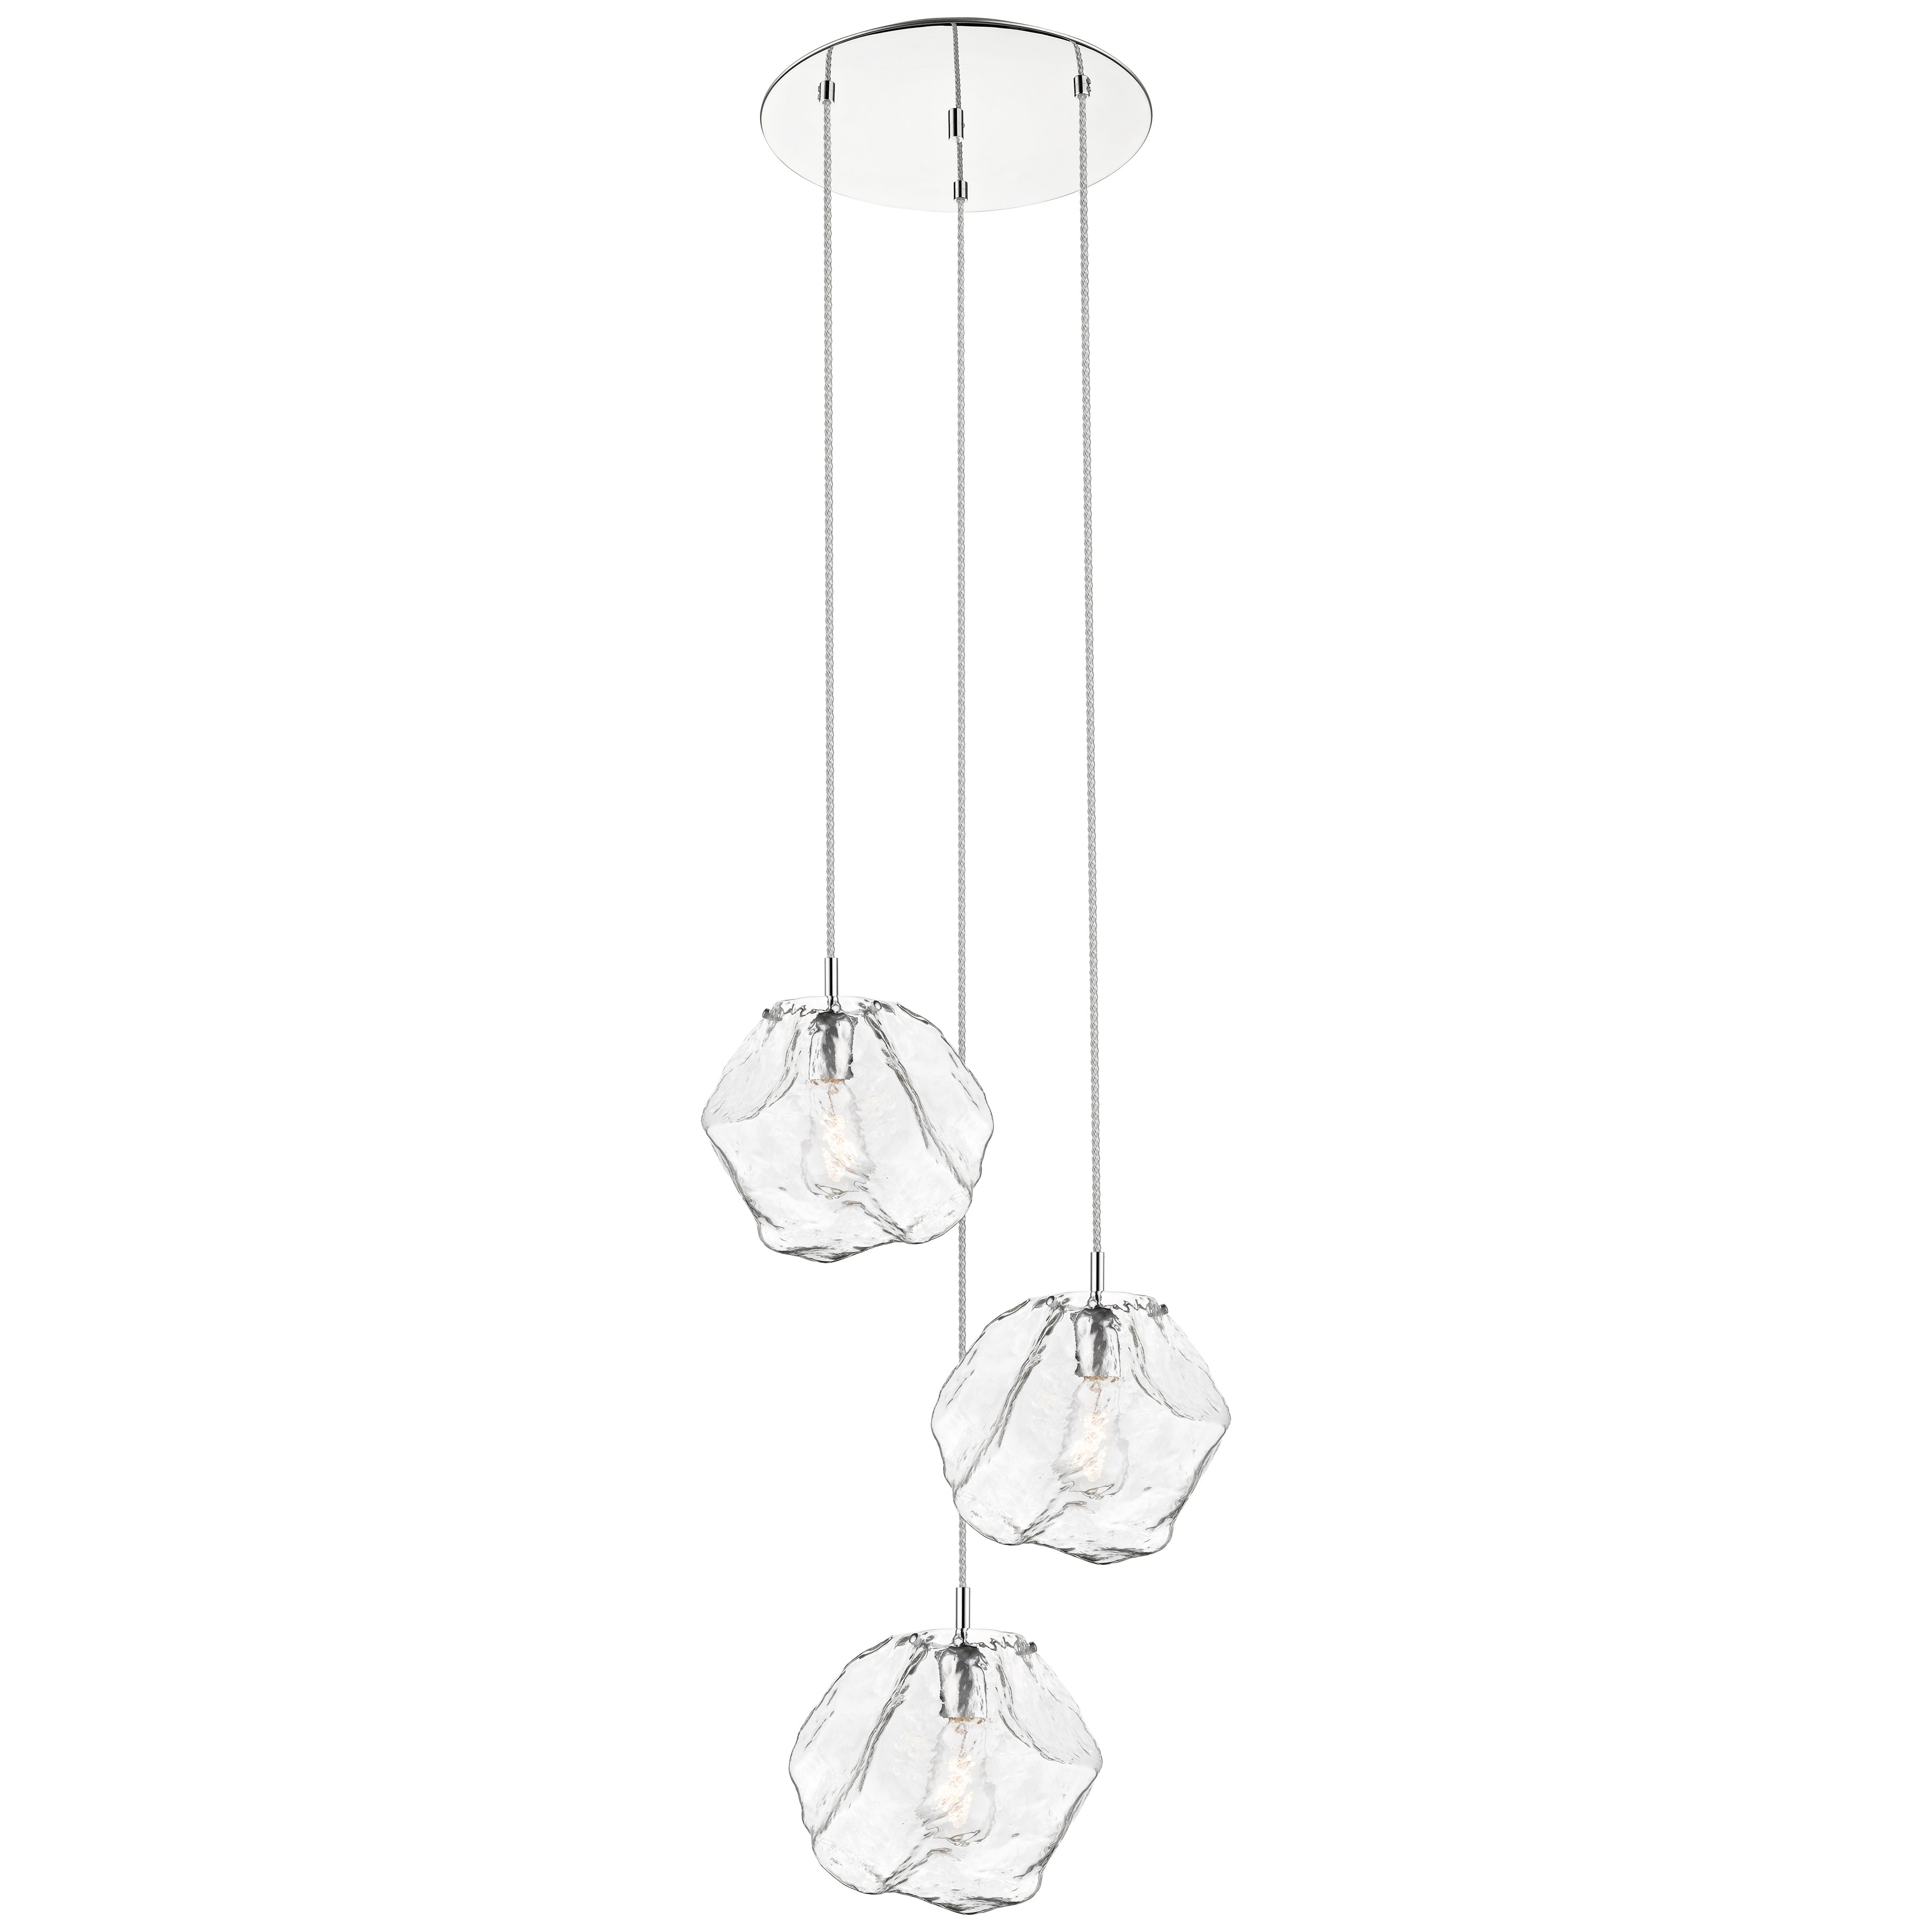 mirrored stainless steel led pendant